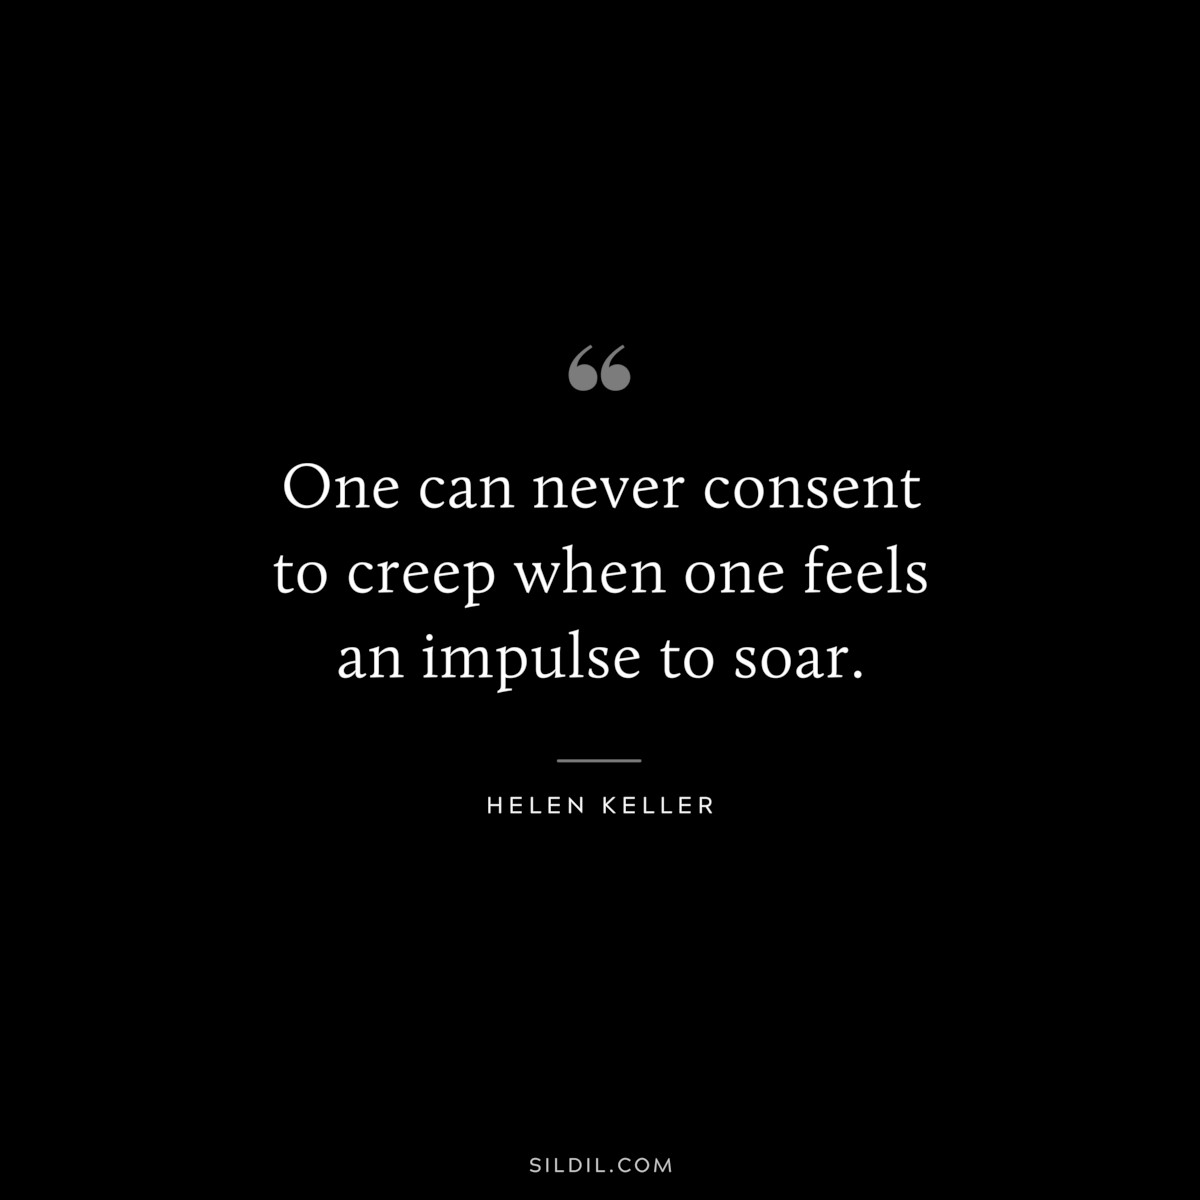 One can never consent to creep when one feels an impulse to soar. ― Helen Keller